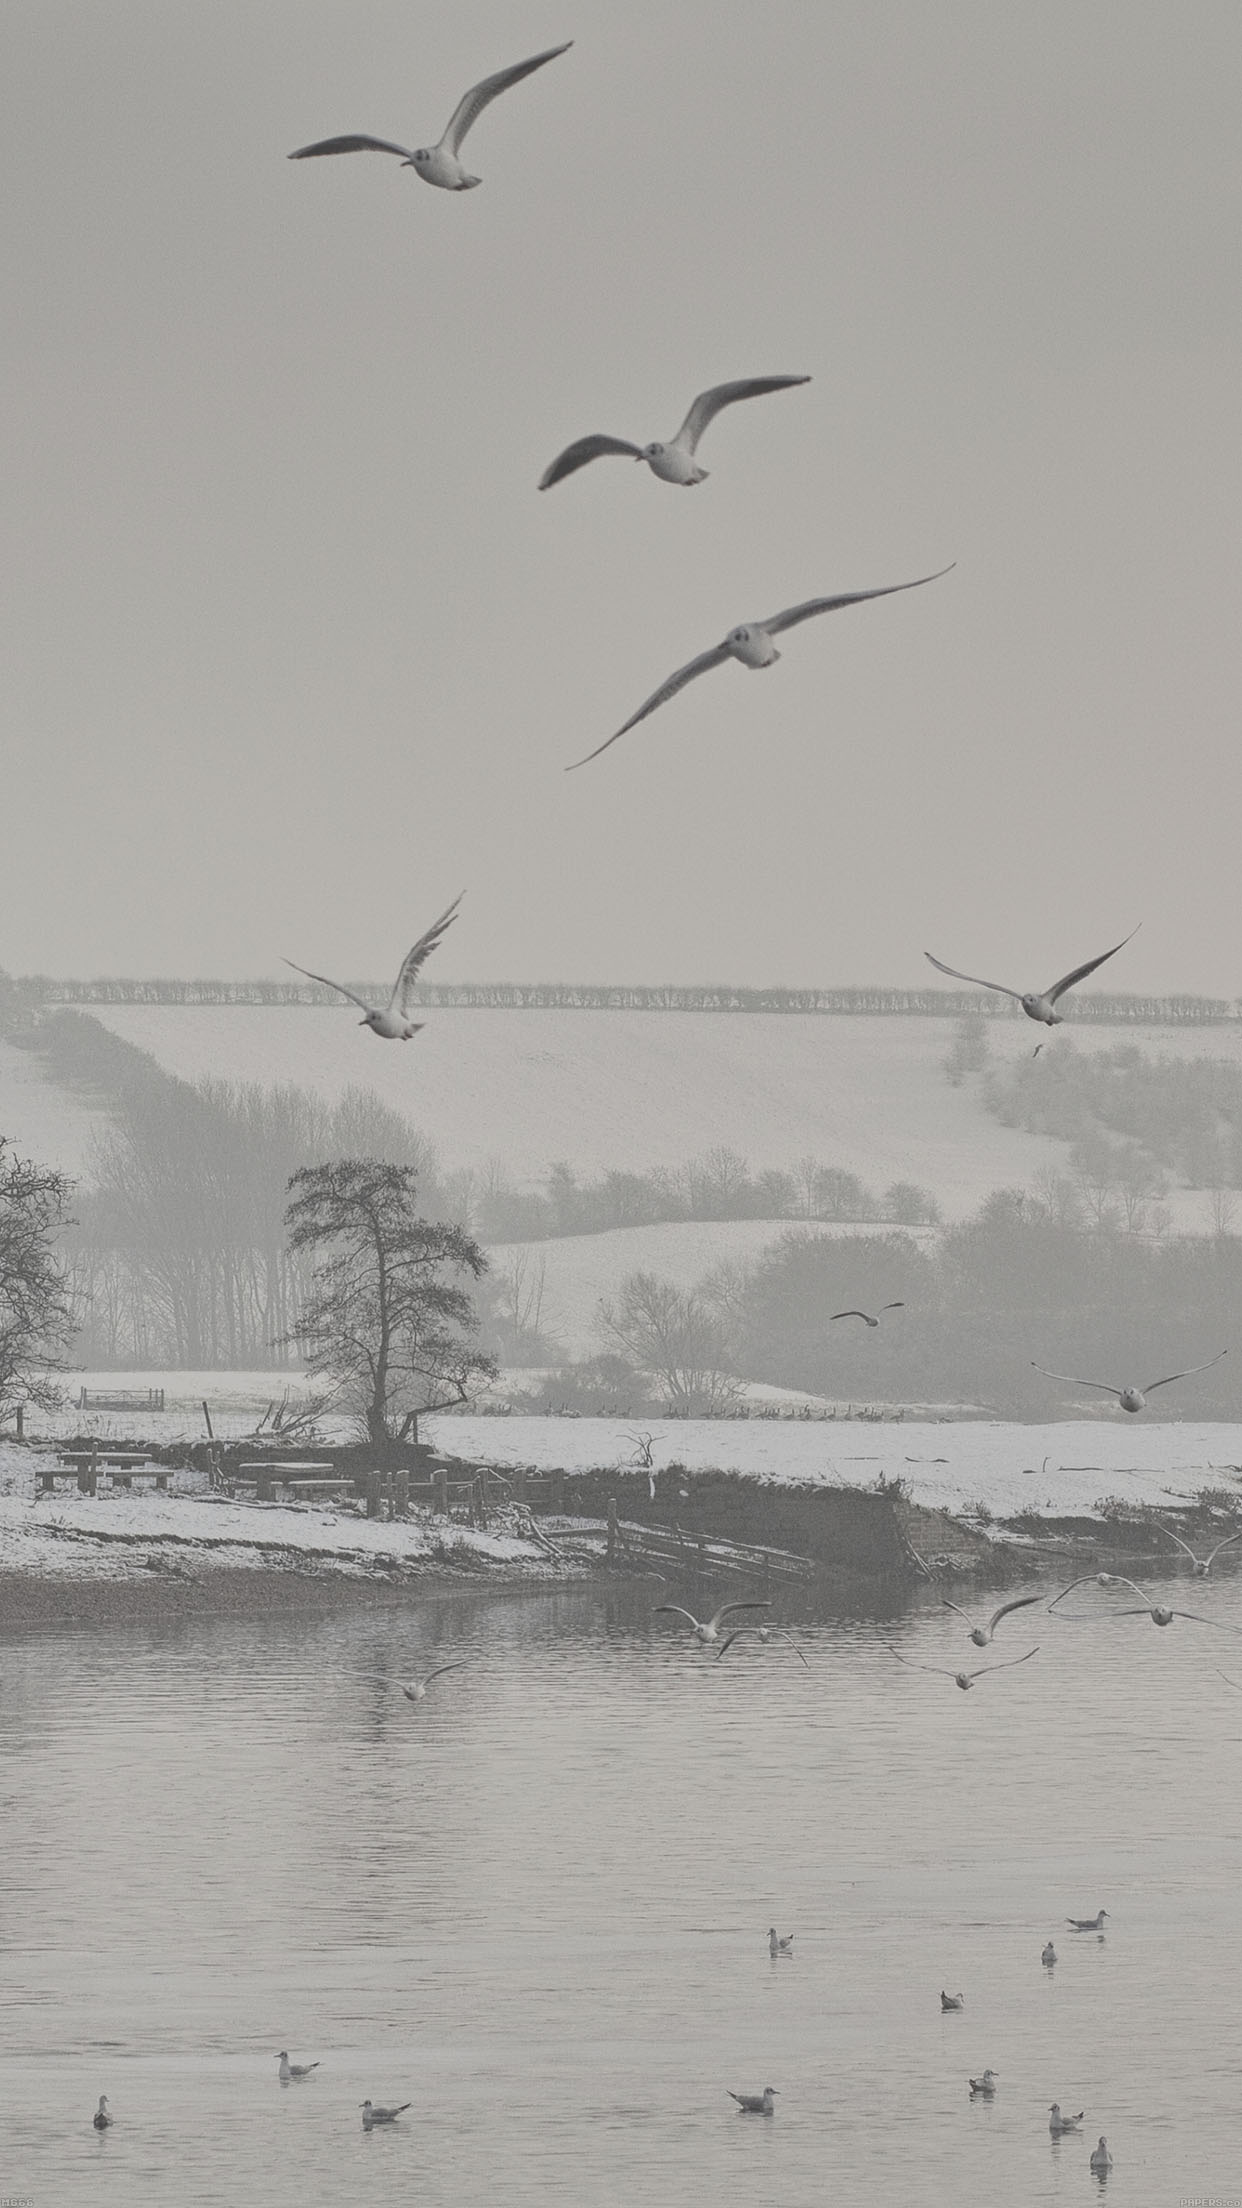 Fly Birds Snowy River Winter Lake Nature Android wallpaper